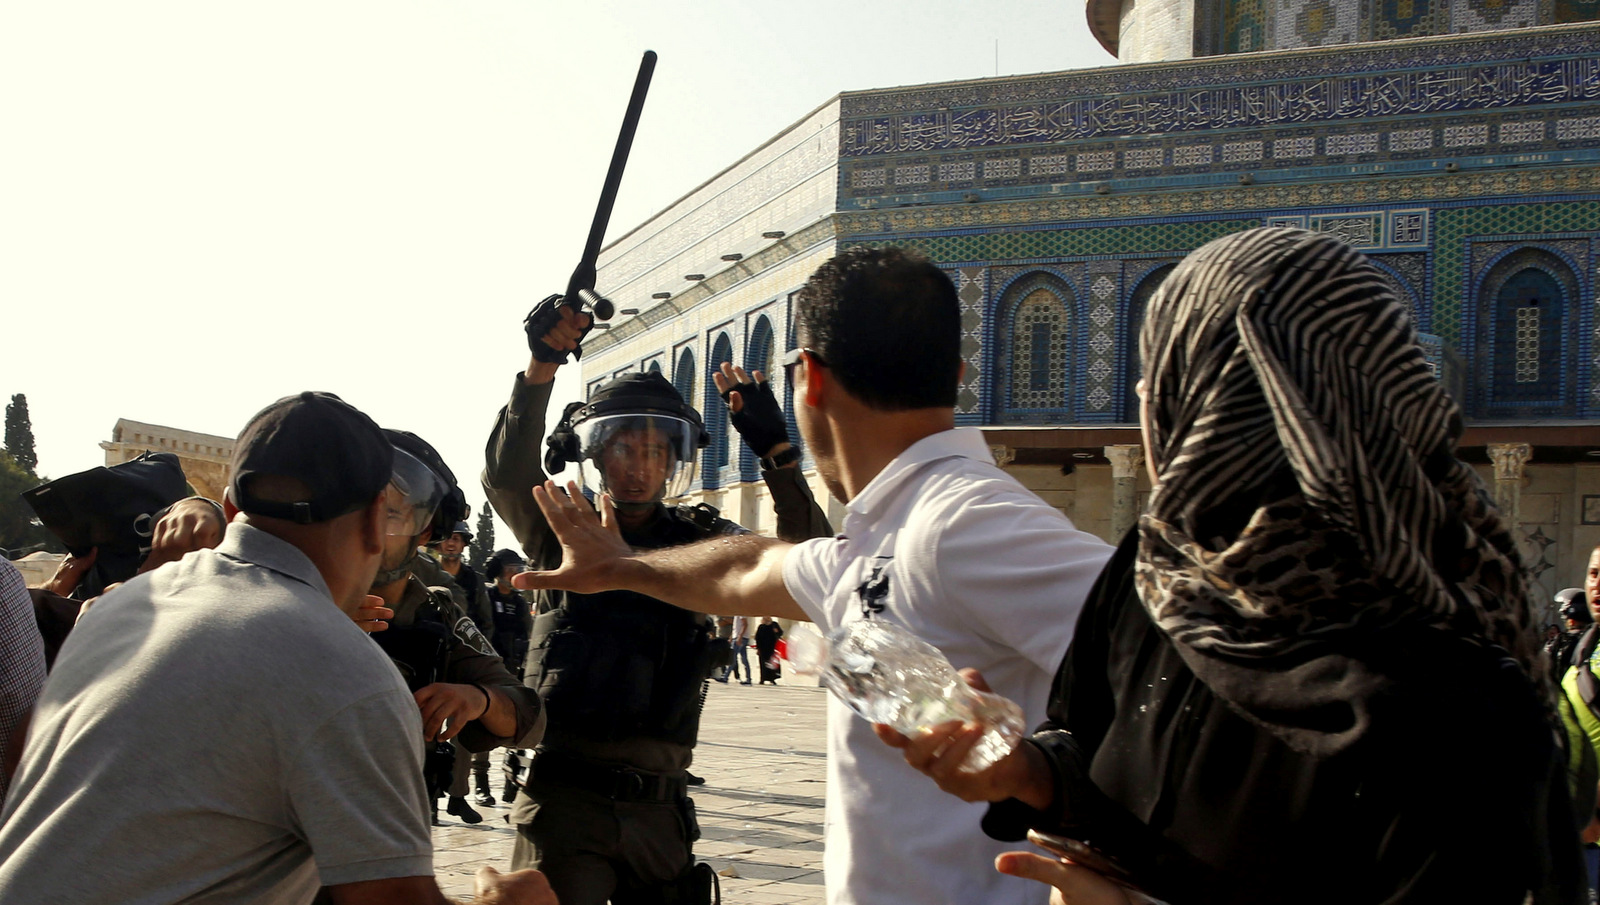 An Israeli police officer raises his baton on Palestinians worshipers near the Al Aqsa Mosque in Jerusalem's Old City, July 27, 2017 (AP/Mahmoud Illean)